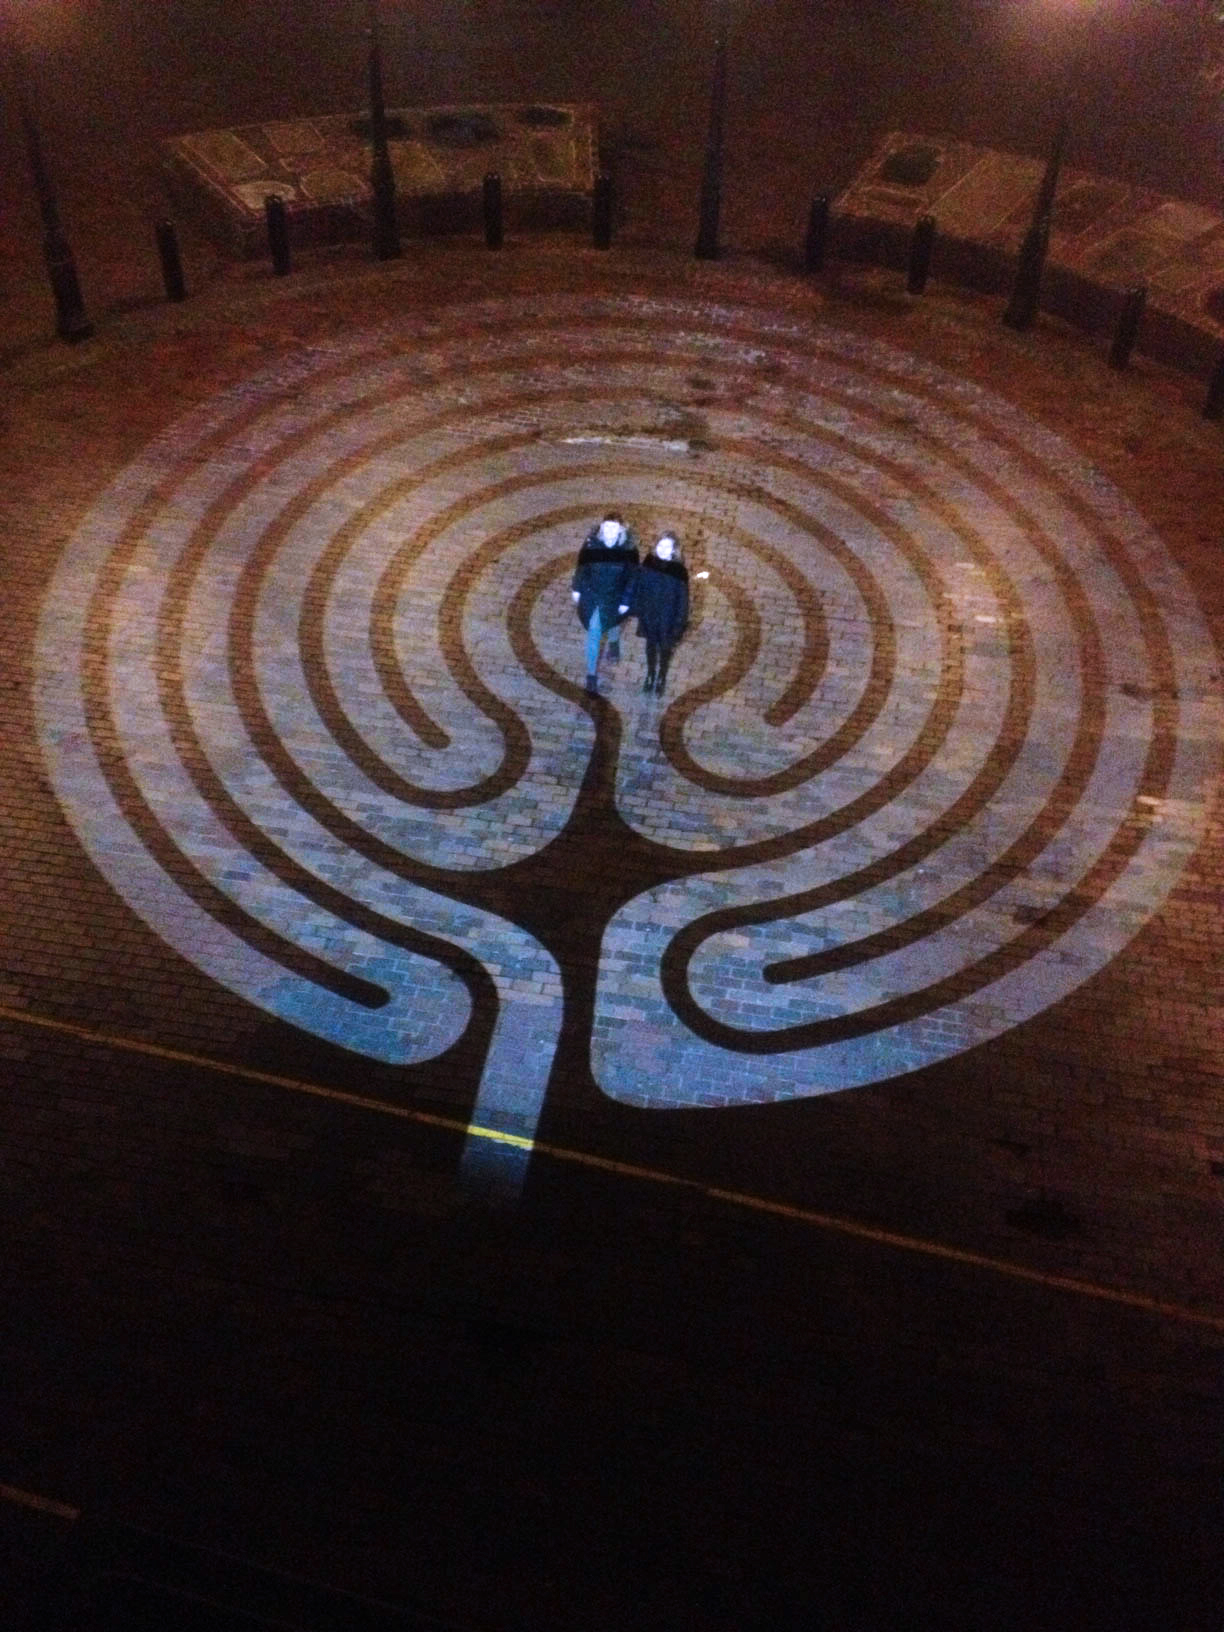 GoboPro LED projector used to make a labyrinth at night on the pavement.